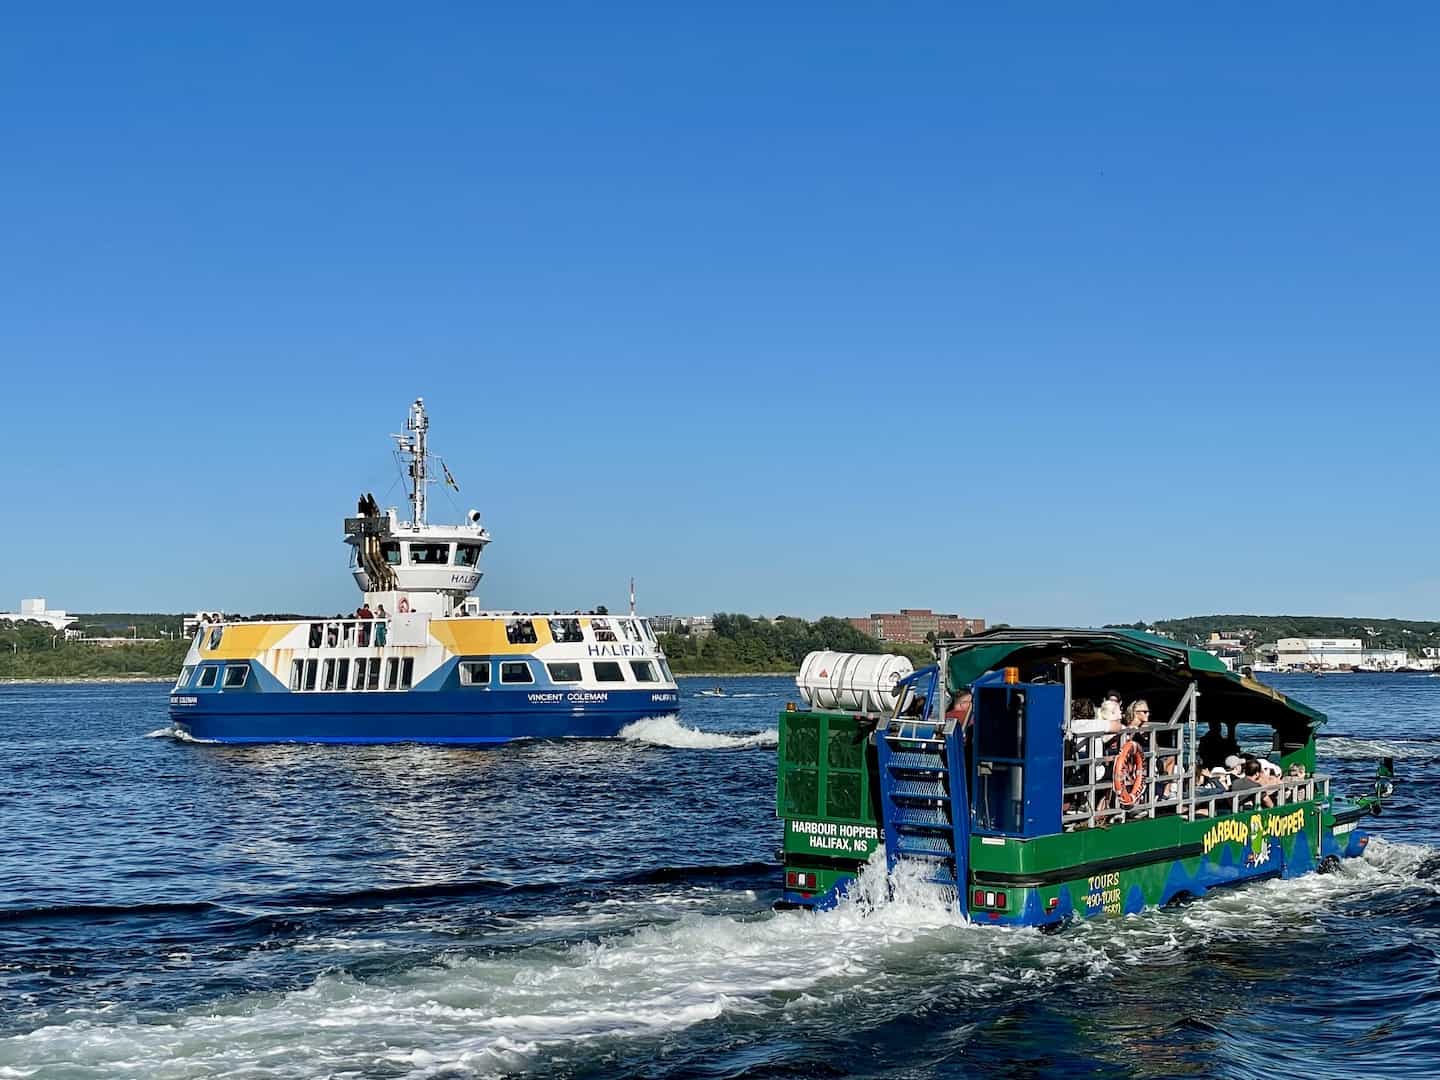 A ferry boat and a tour boat pass each other in the Halifax harbor.